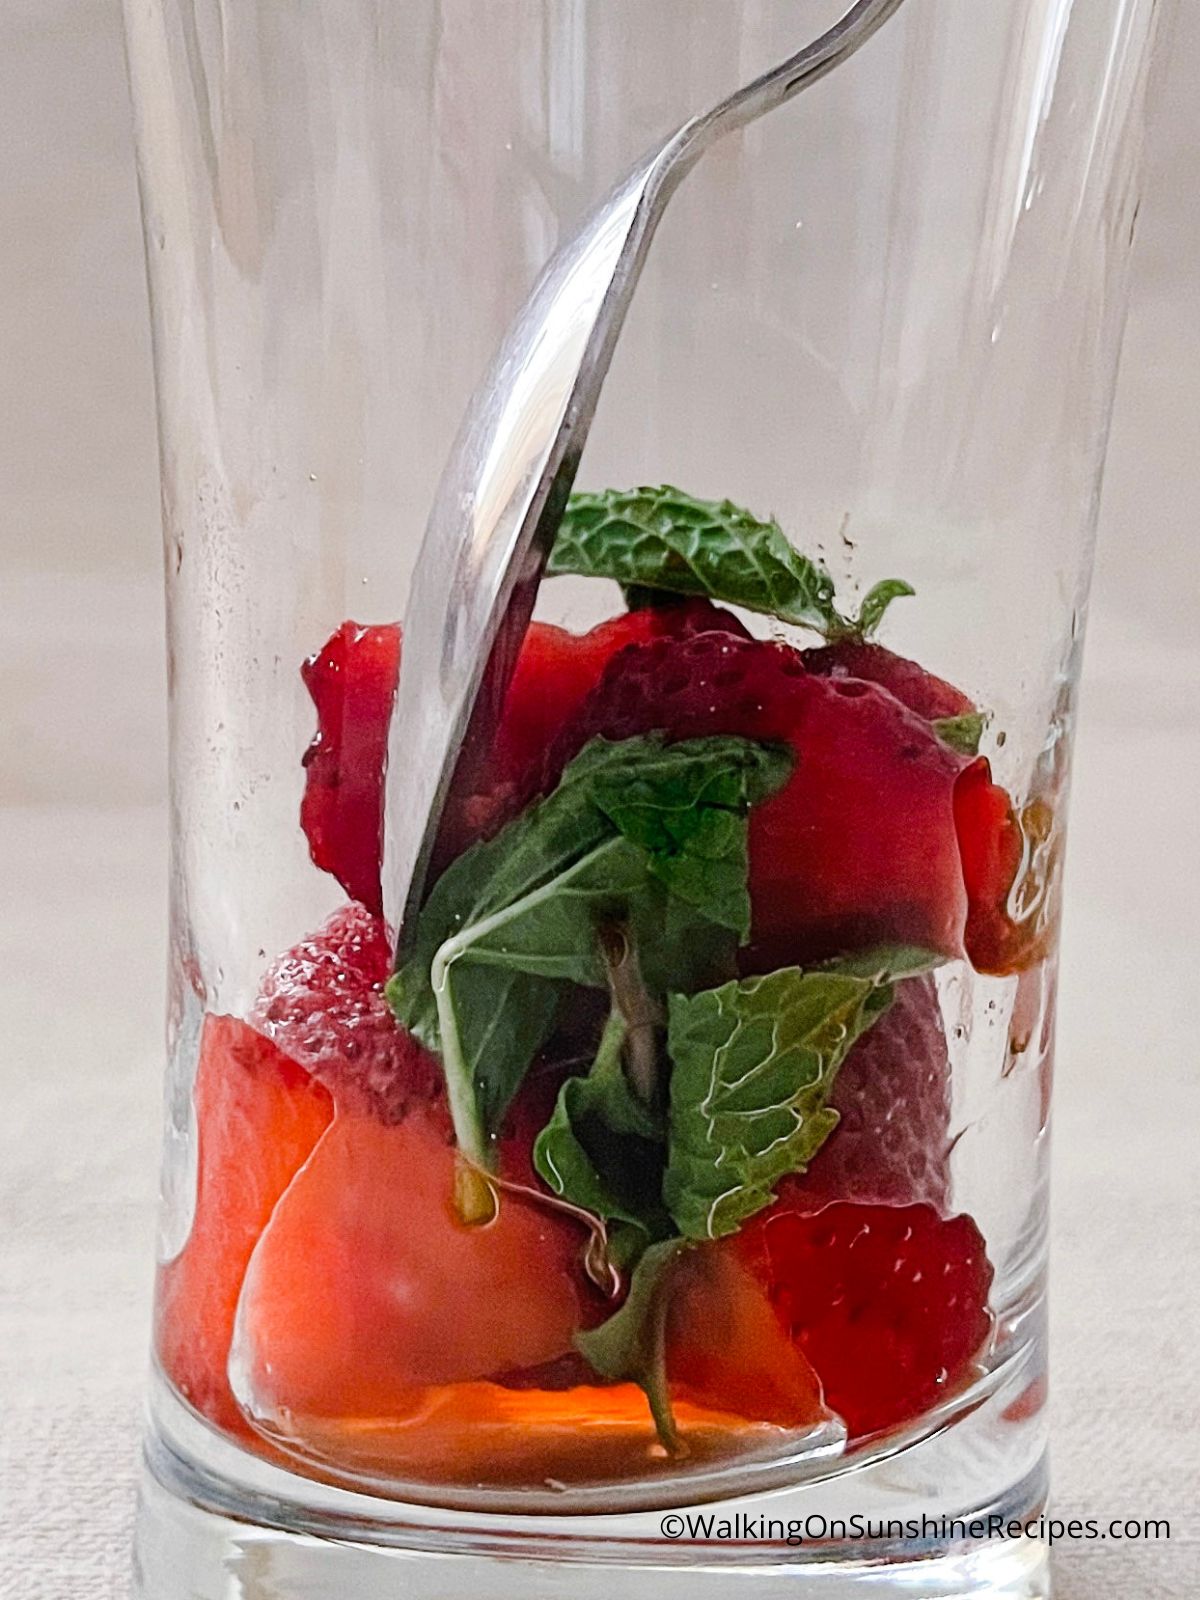 Crush mint leaves with the strawberries.